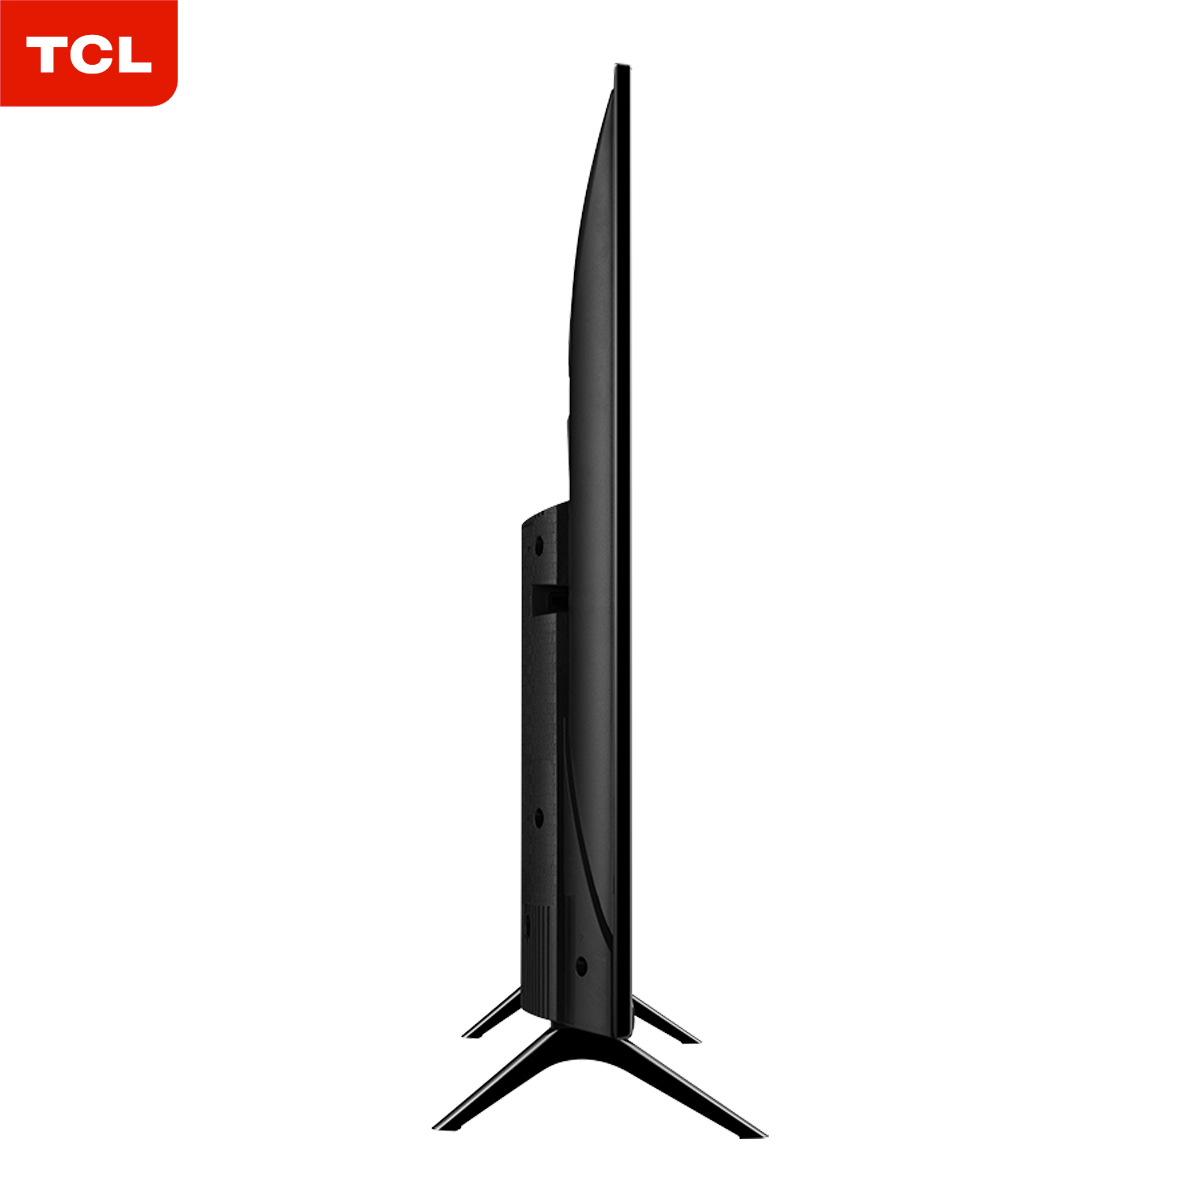 3.TCL 40S6500